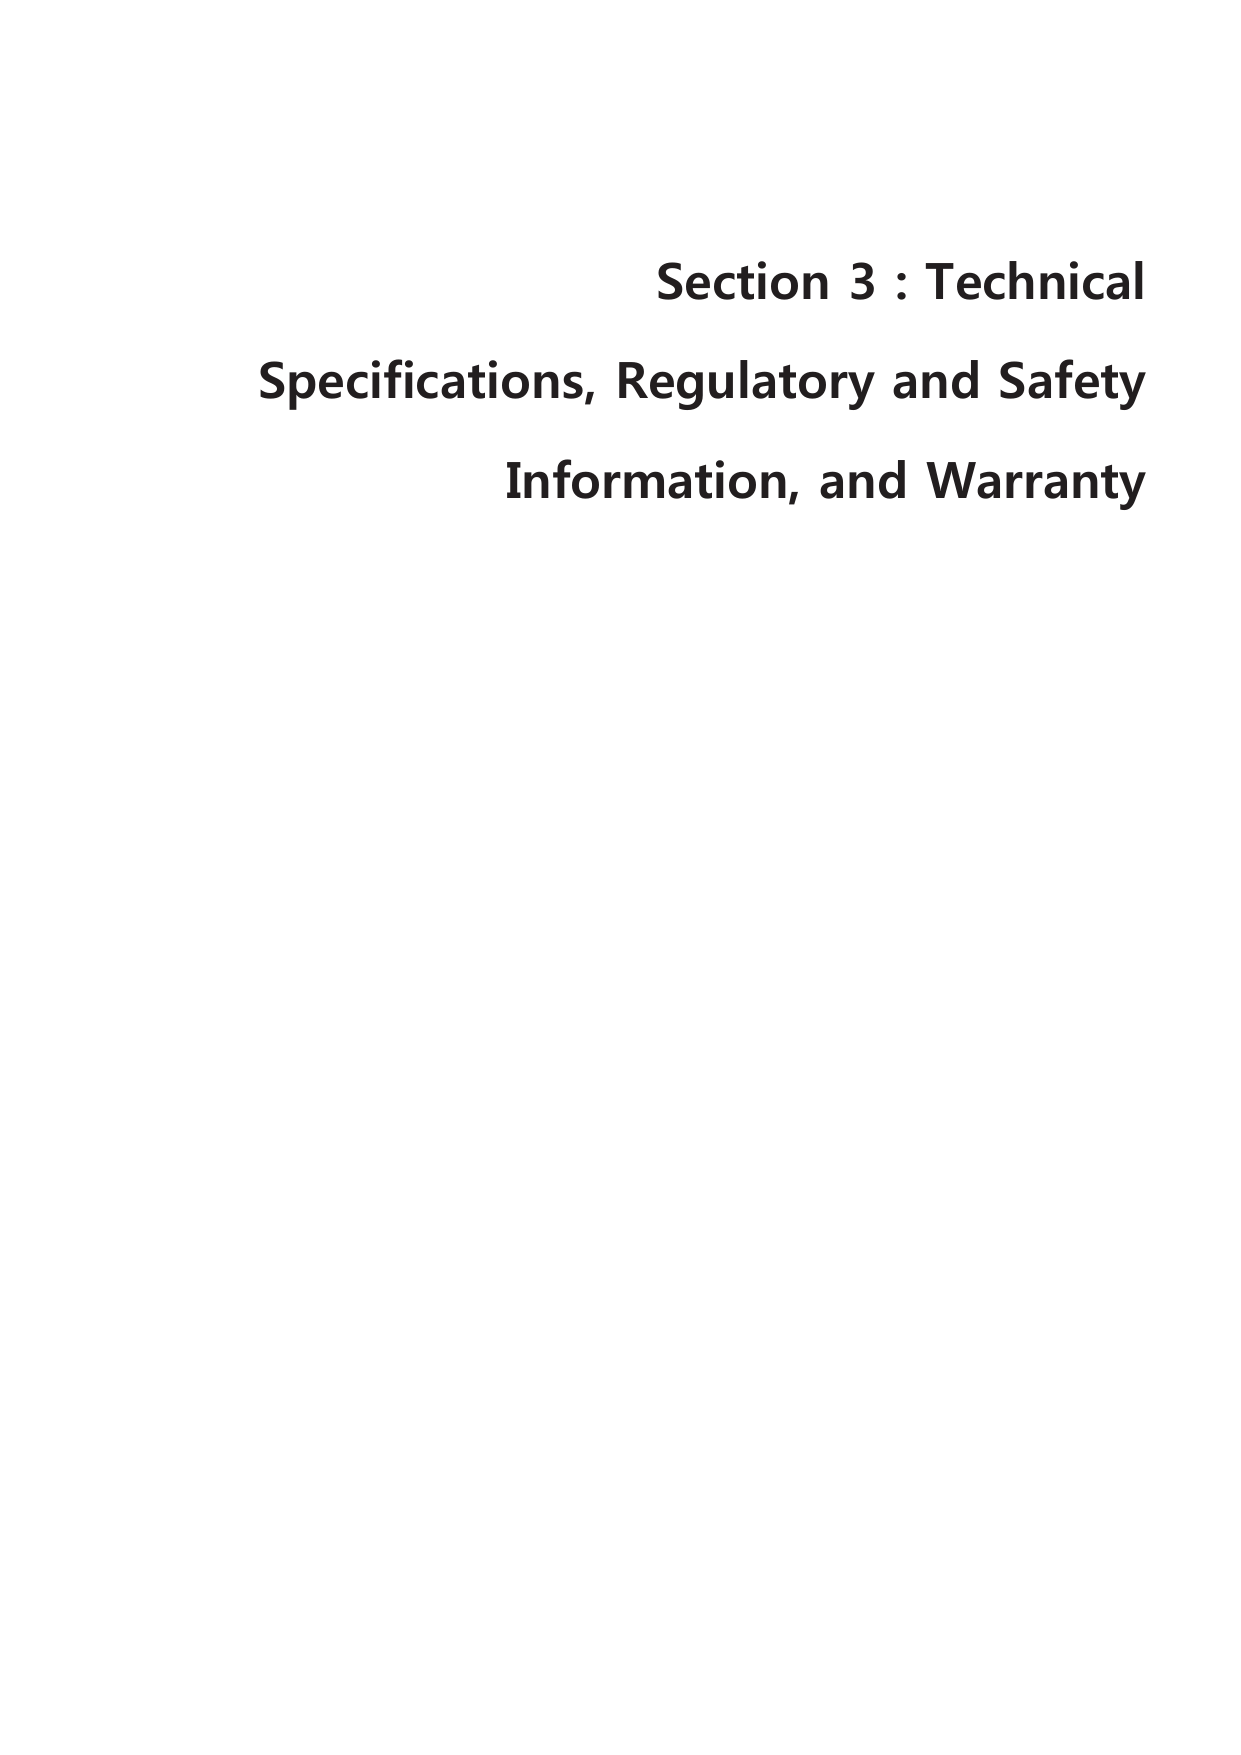  Section 3 : Technical Specifications, Regulatory and Safety Information, and Warranty                           